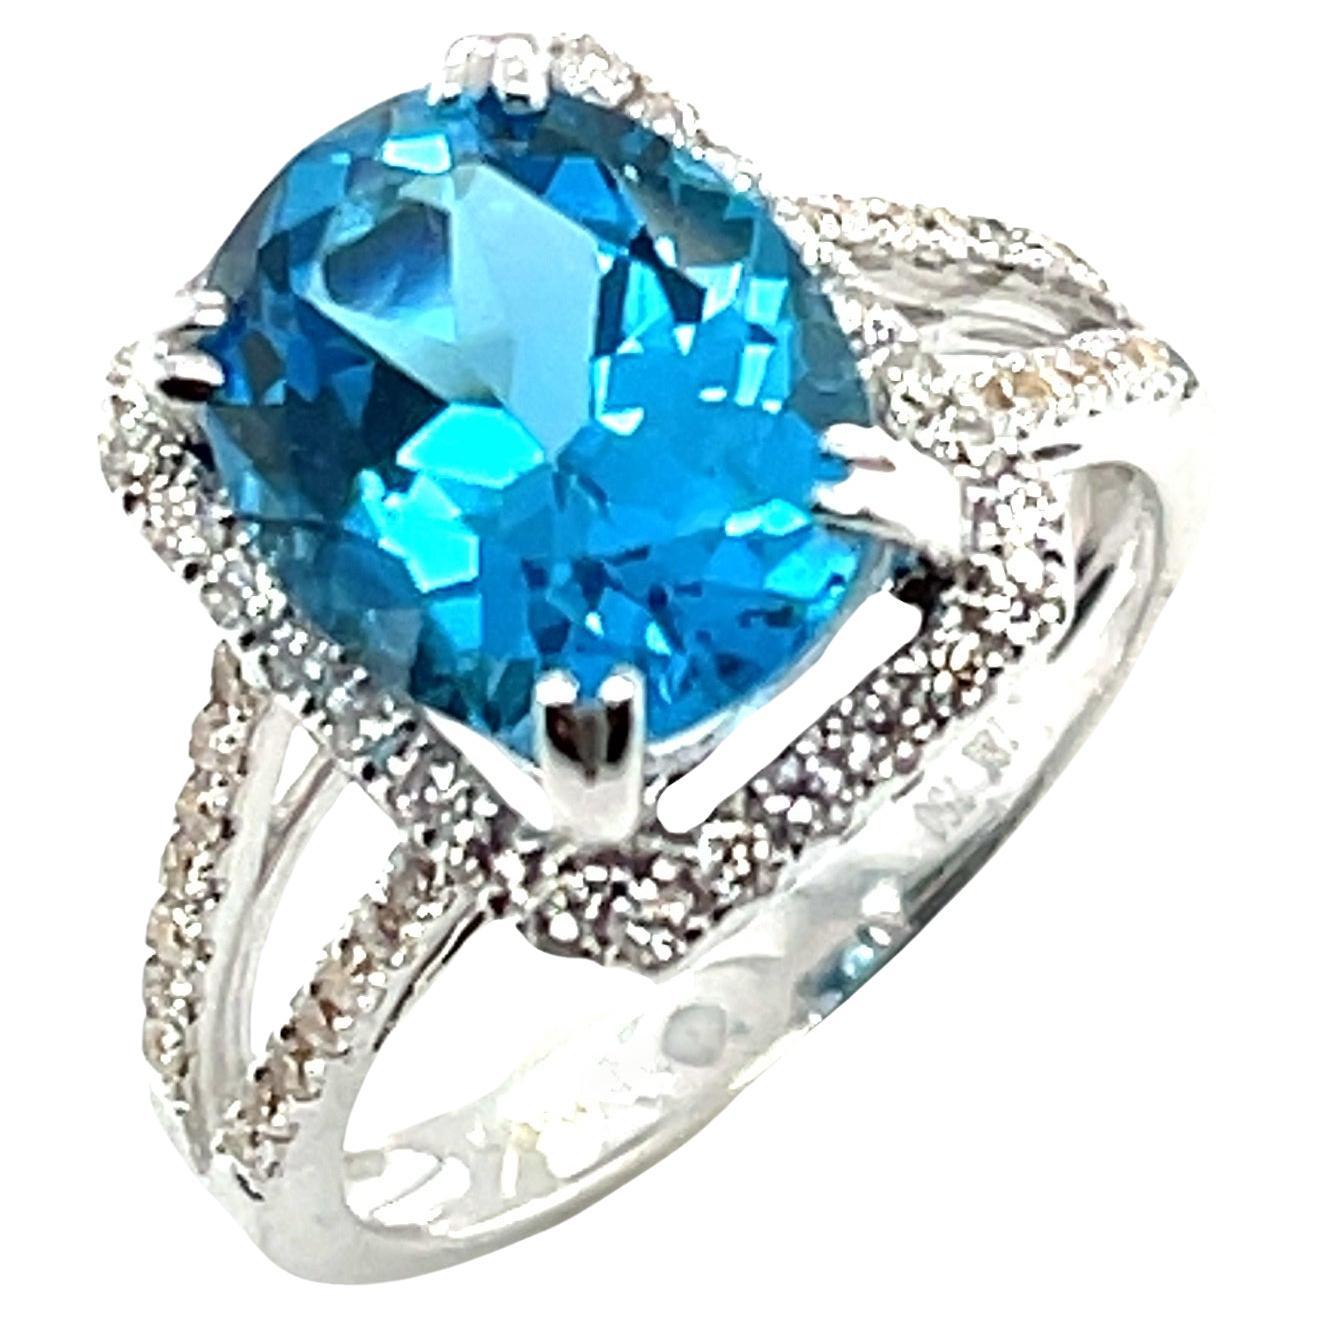 4.38 Carat Blue Topaz and Diamond Halo Cocktail Ring in 18k White Gold 